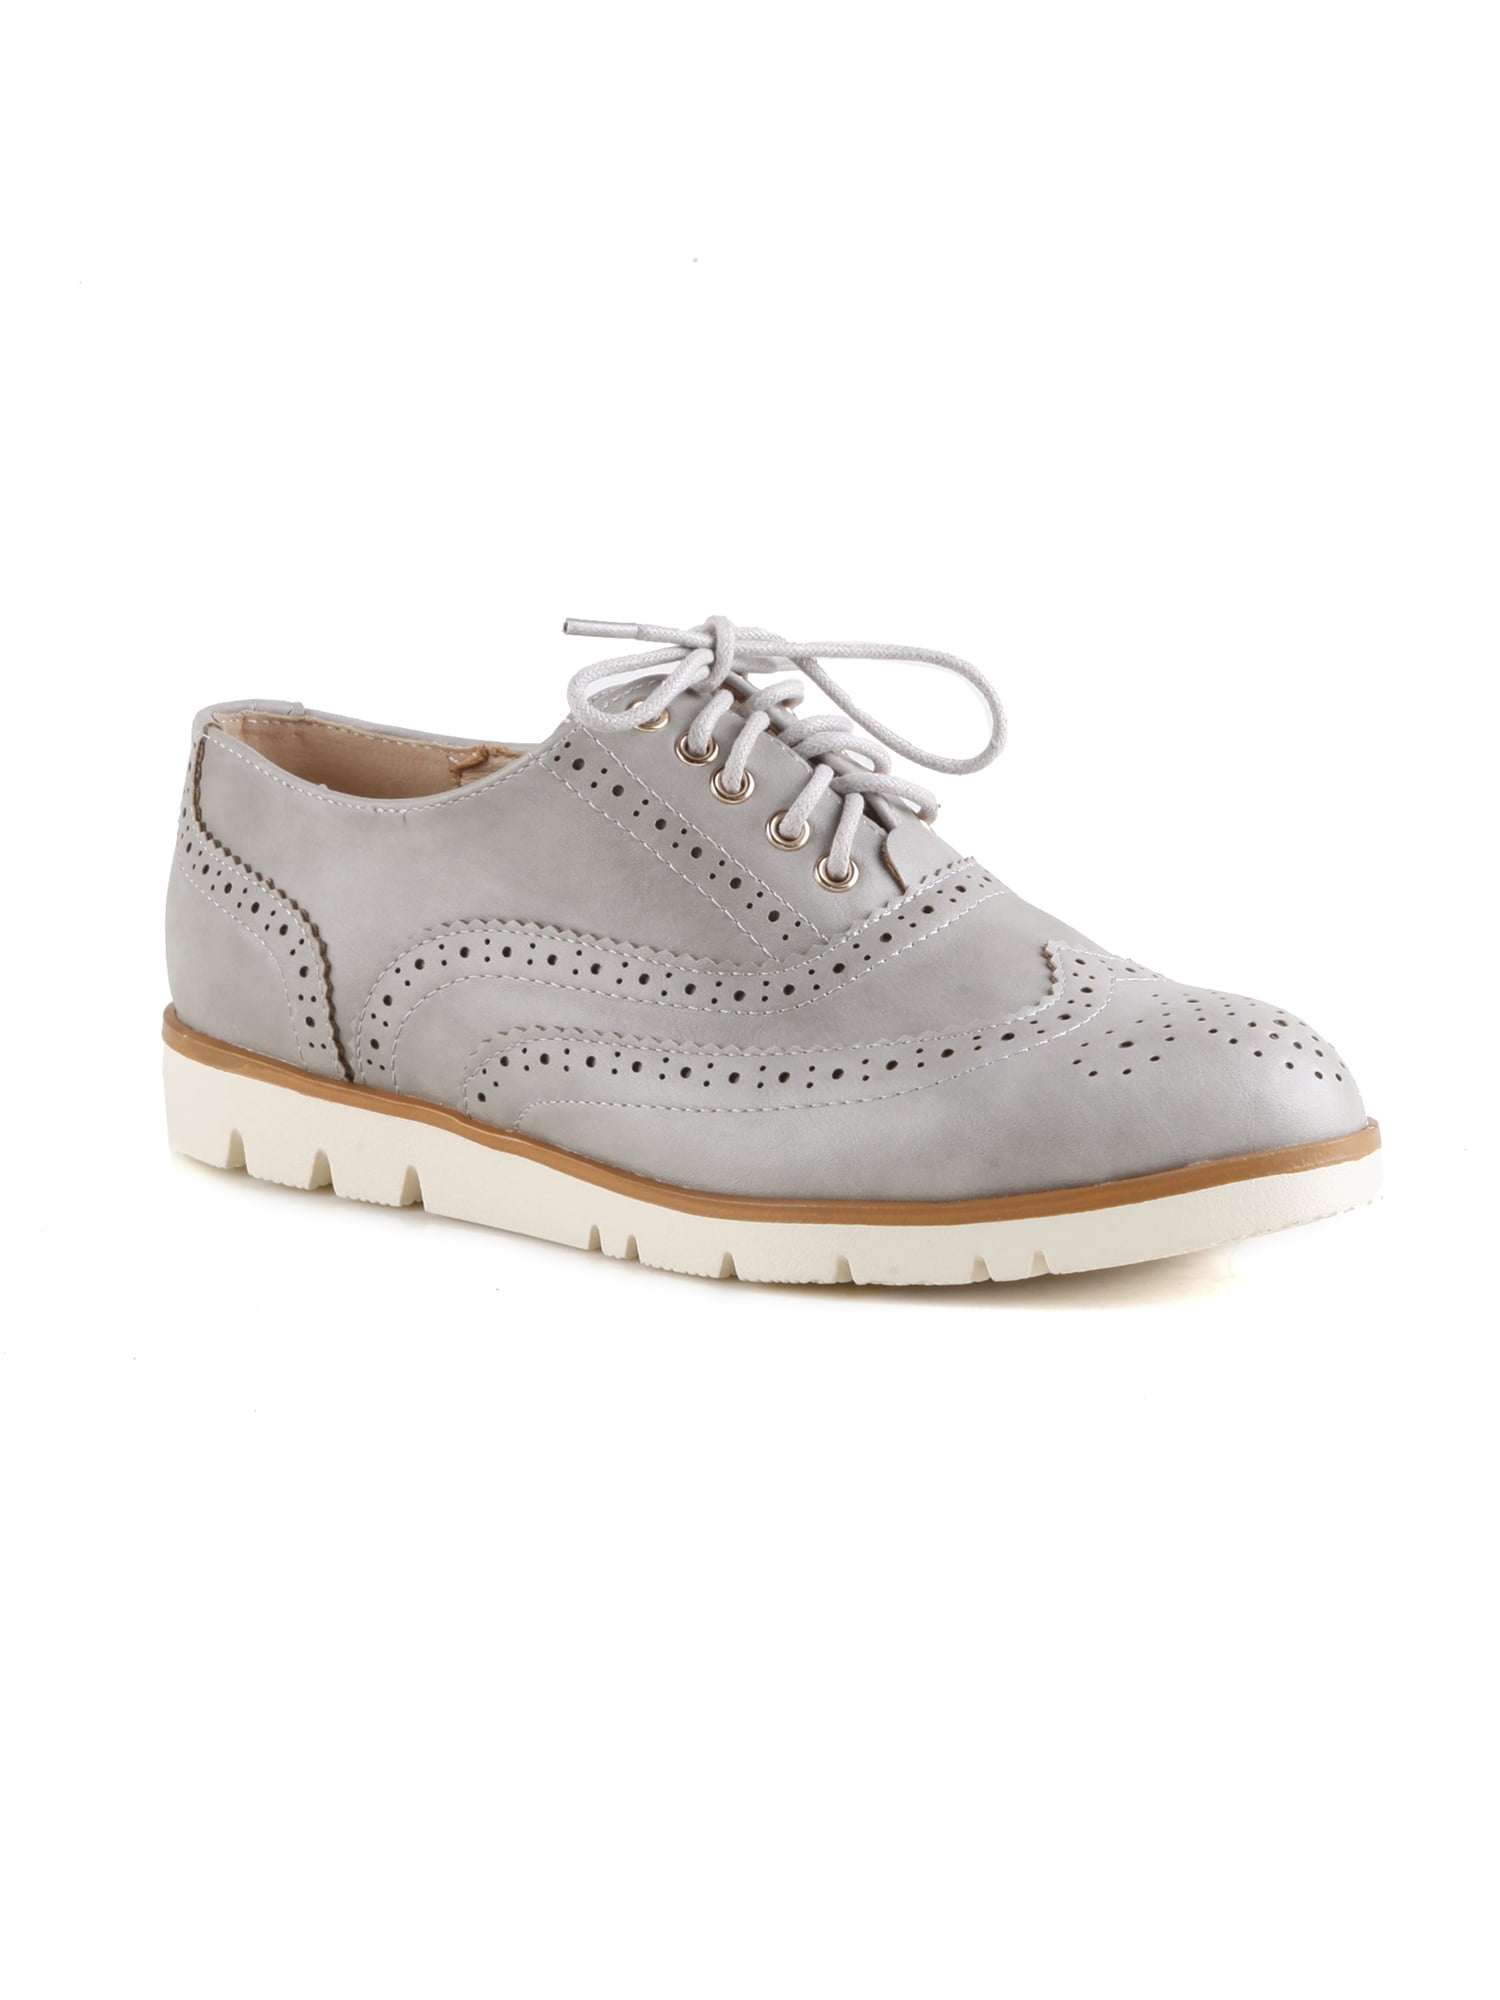 Lace-up Women's Oxfords in Grey - Walmart.com